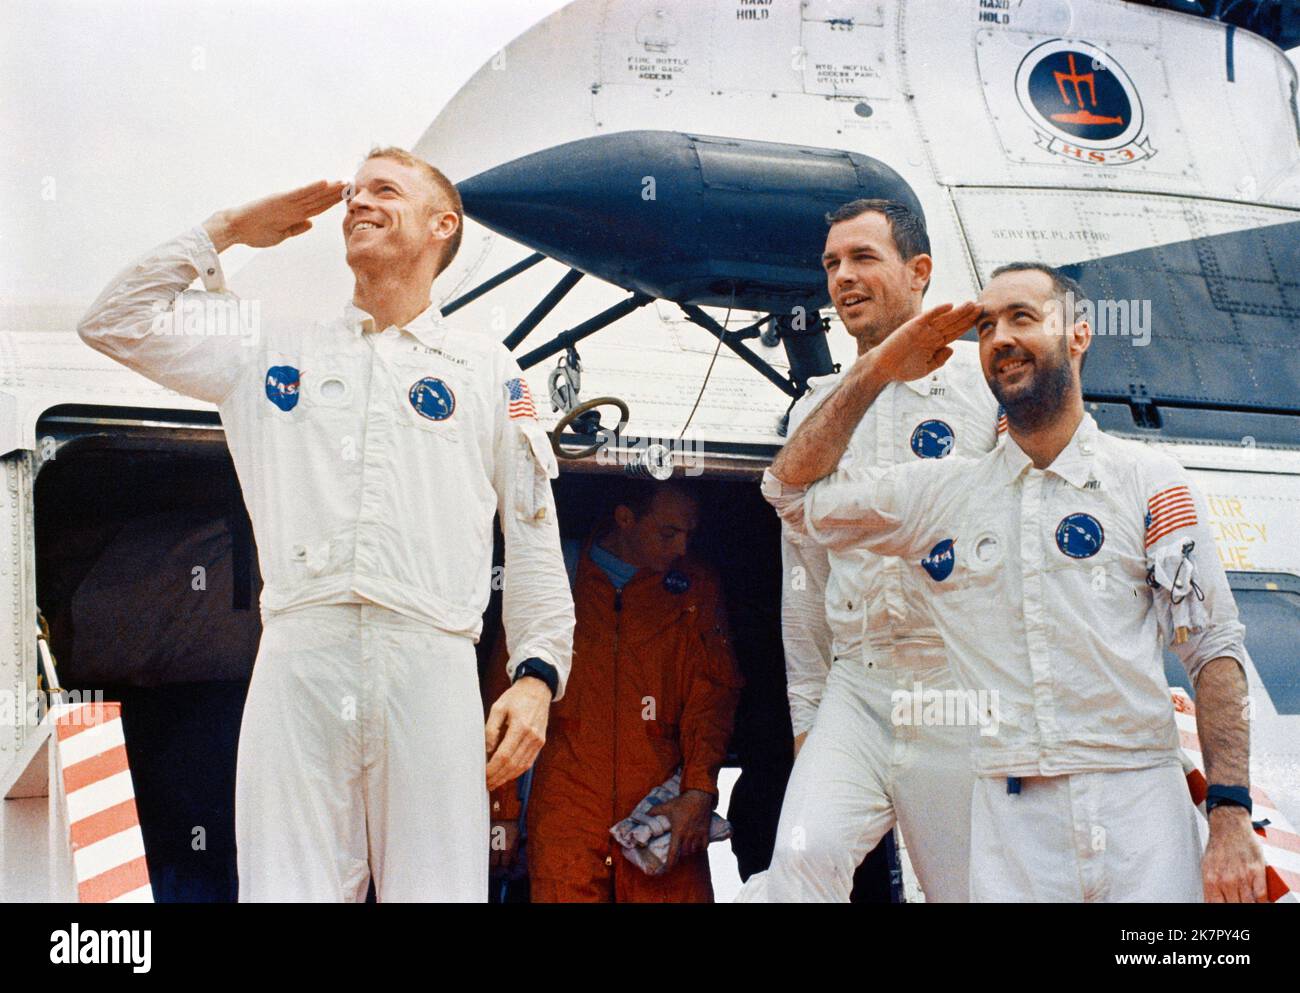 USS Guadalcanal, United States. 18th Oct, 2022. NASA Apollo 9 astronauts, left to right, Russell Schweickart, David Scott, and James McDivitt salute as they arrive aboard the USS Guadalcanal following Splashdown in the Atlantic Ocean, March 13, 1969 off the coast of Florida. McDivitt commanded the first Gemini spacewalk mission and commanded Apollo 9 during the first crewed orbital flight of a the lunar module, died October 15, 2022 at age 93. Credit: NASA/NASA/Alamy Live News Stock Photo